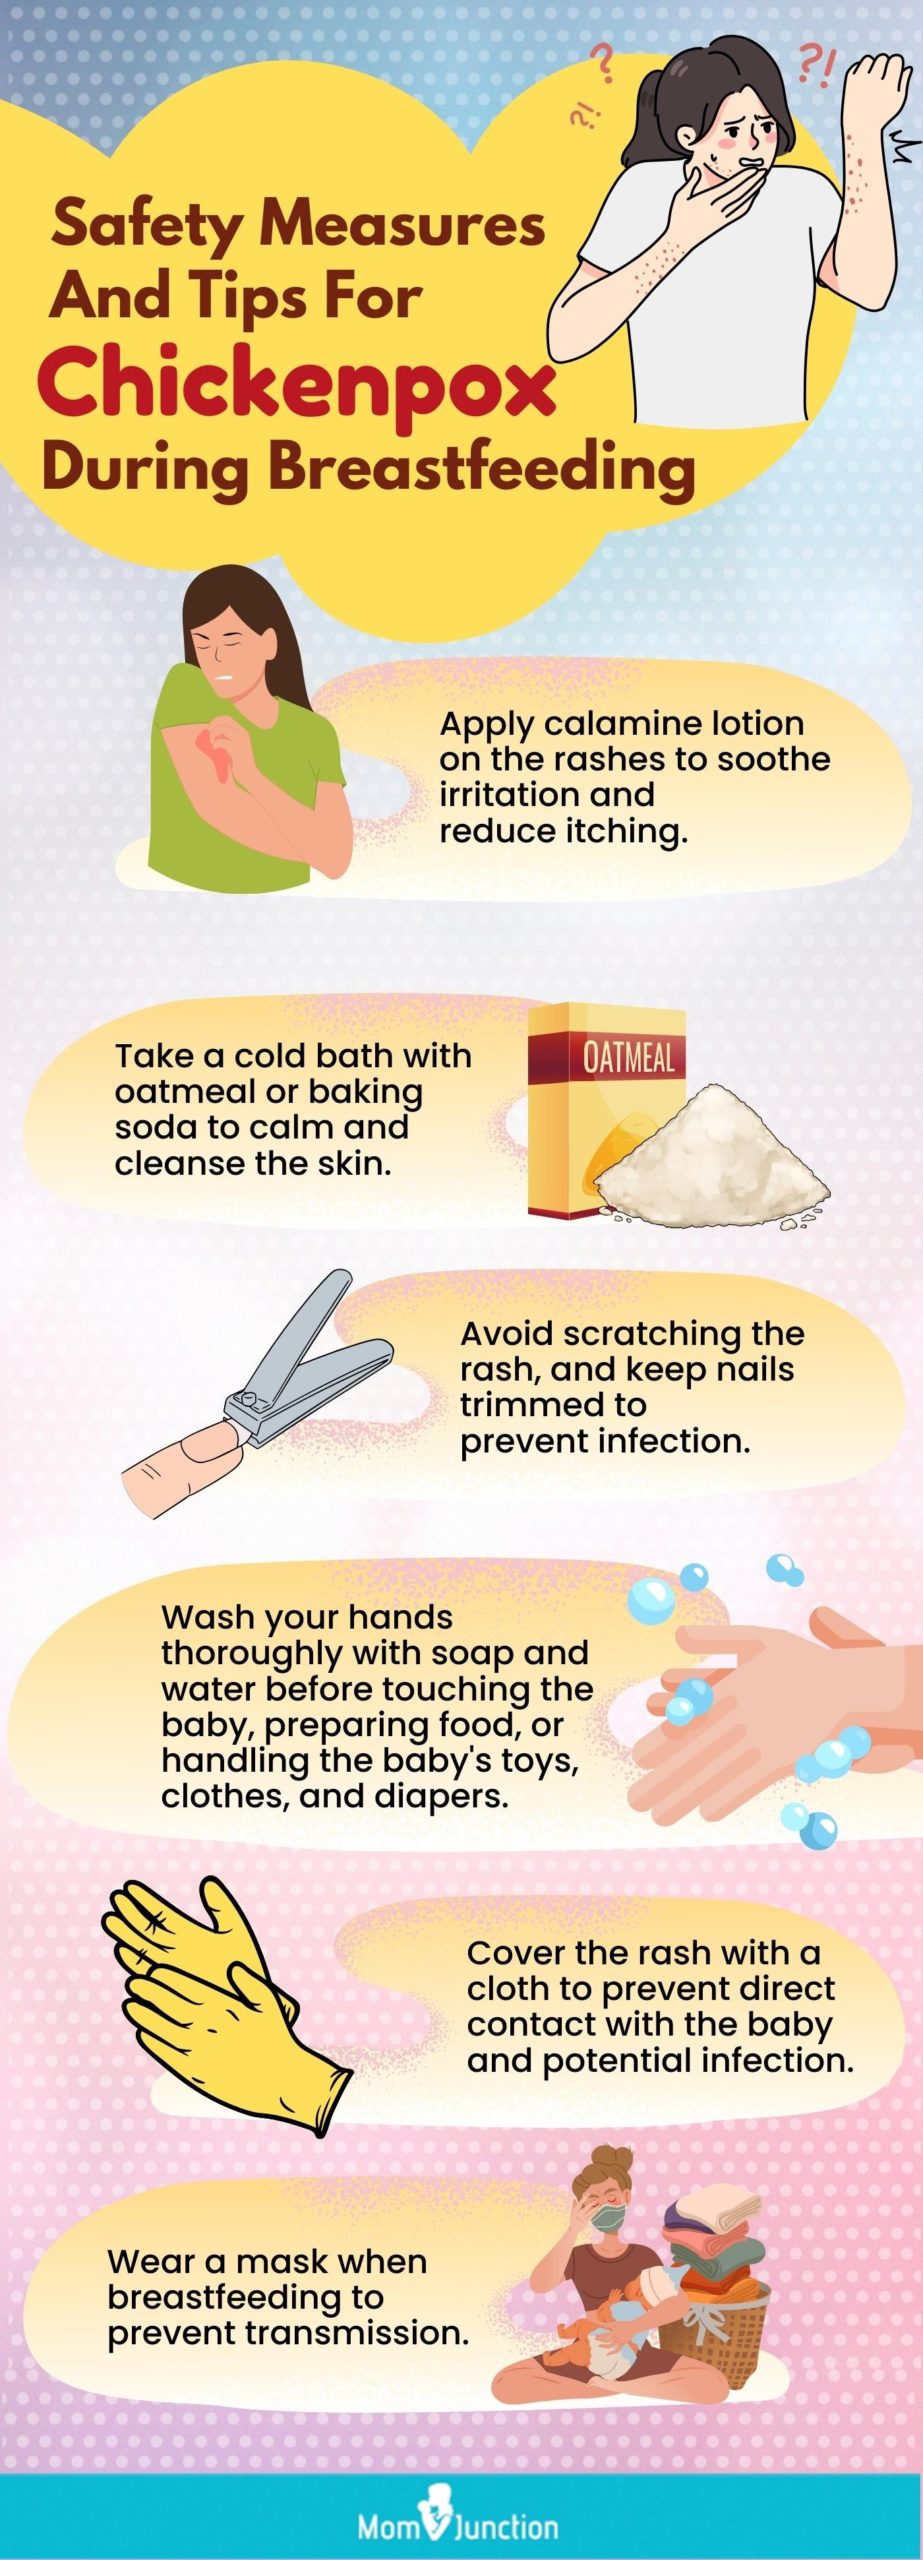 safety measures and tips for chickenpox during breastfeeding (infographic)